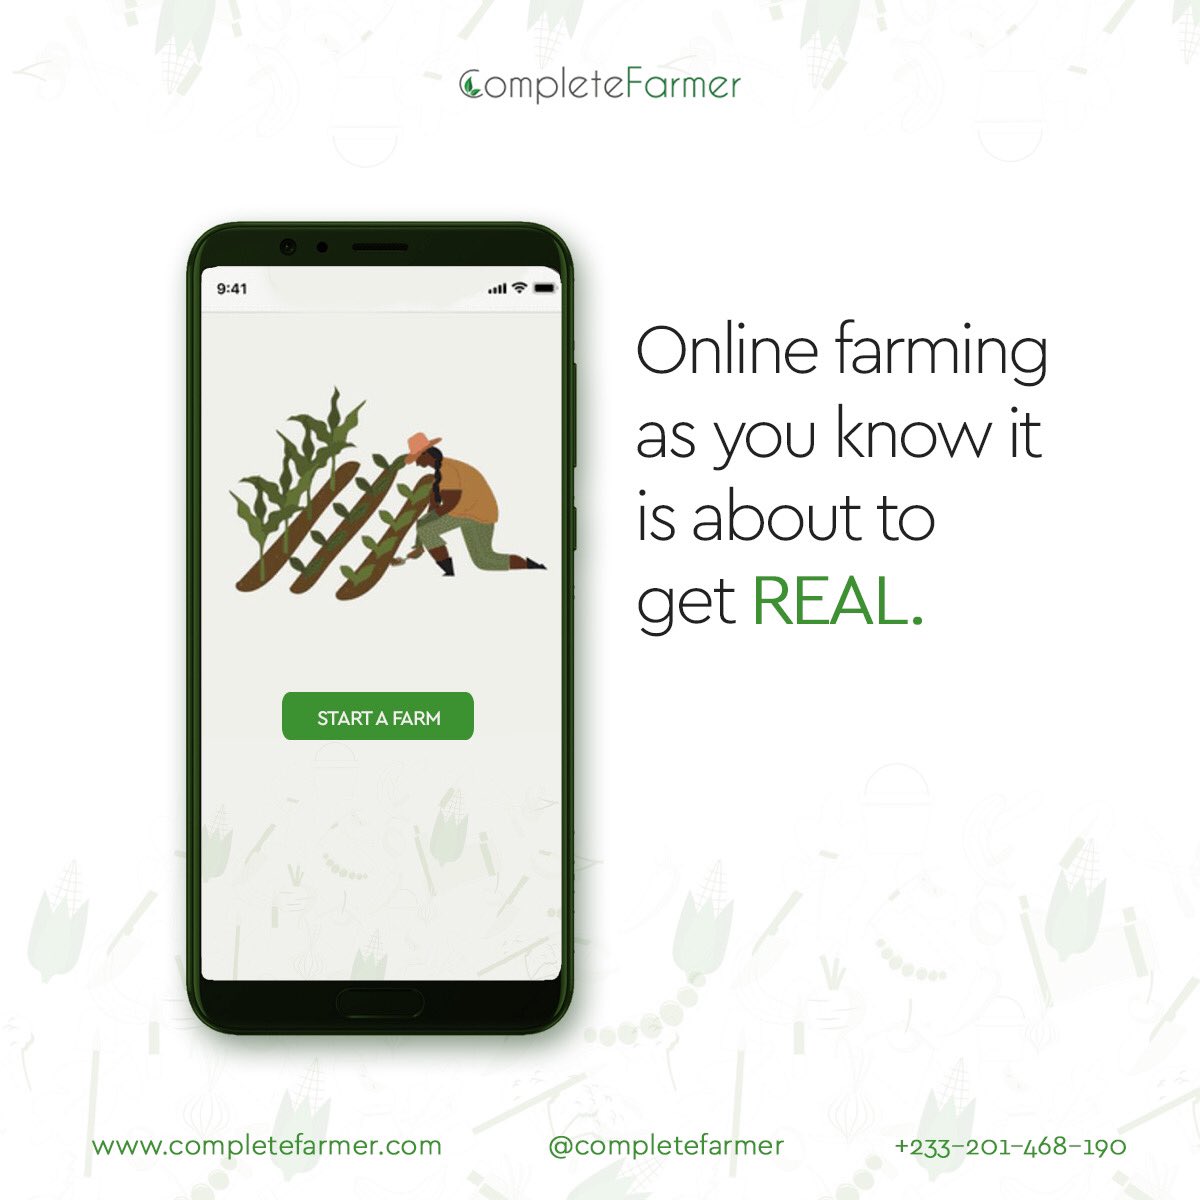 We are building the online farming platform that (tells ❌)⁣⁣⁣ shows ✅ you the whole story. ⁣⁣⁣

Stay tuned for the beta launch!

⁣⁣⁣#Farmwithease #ProductLaunch #NewProductRelease
#NotYourRegularFarmingPlatform